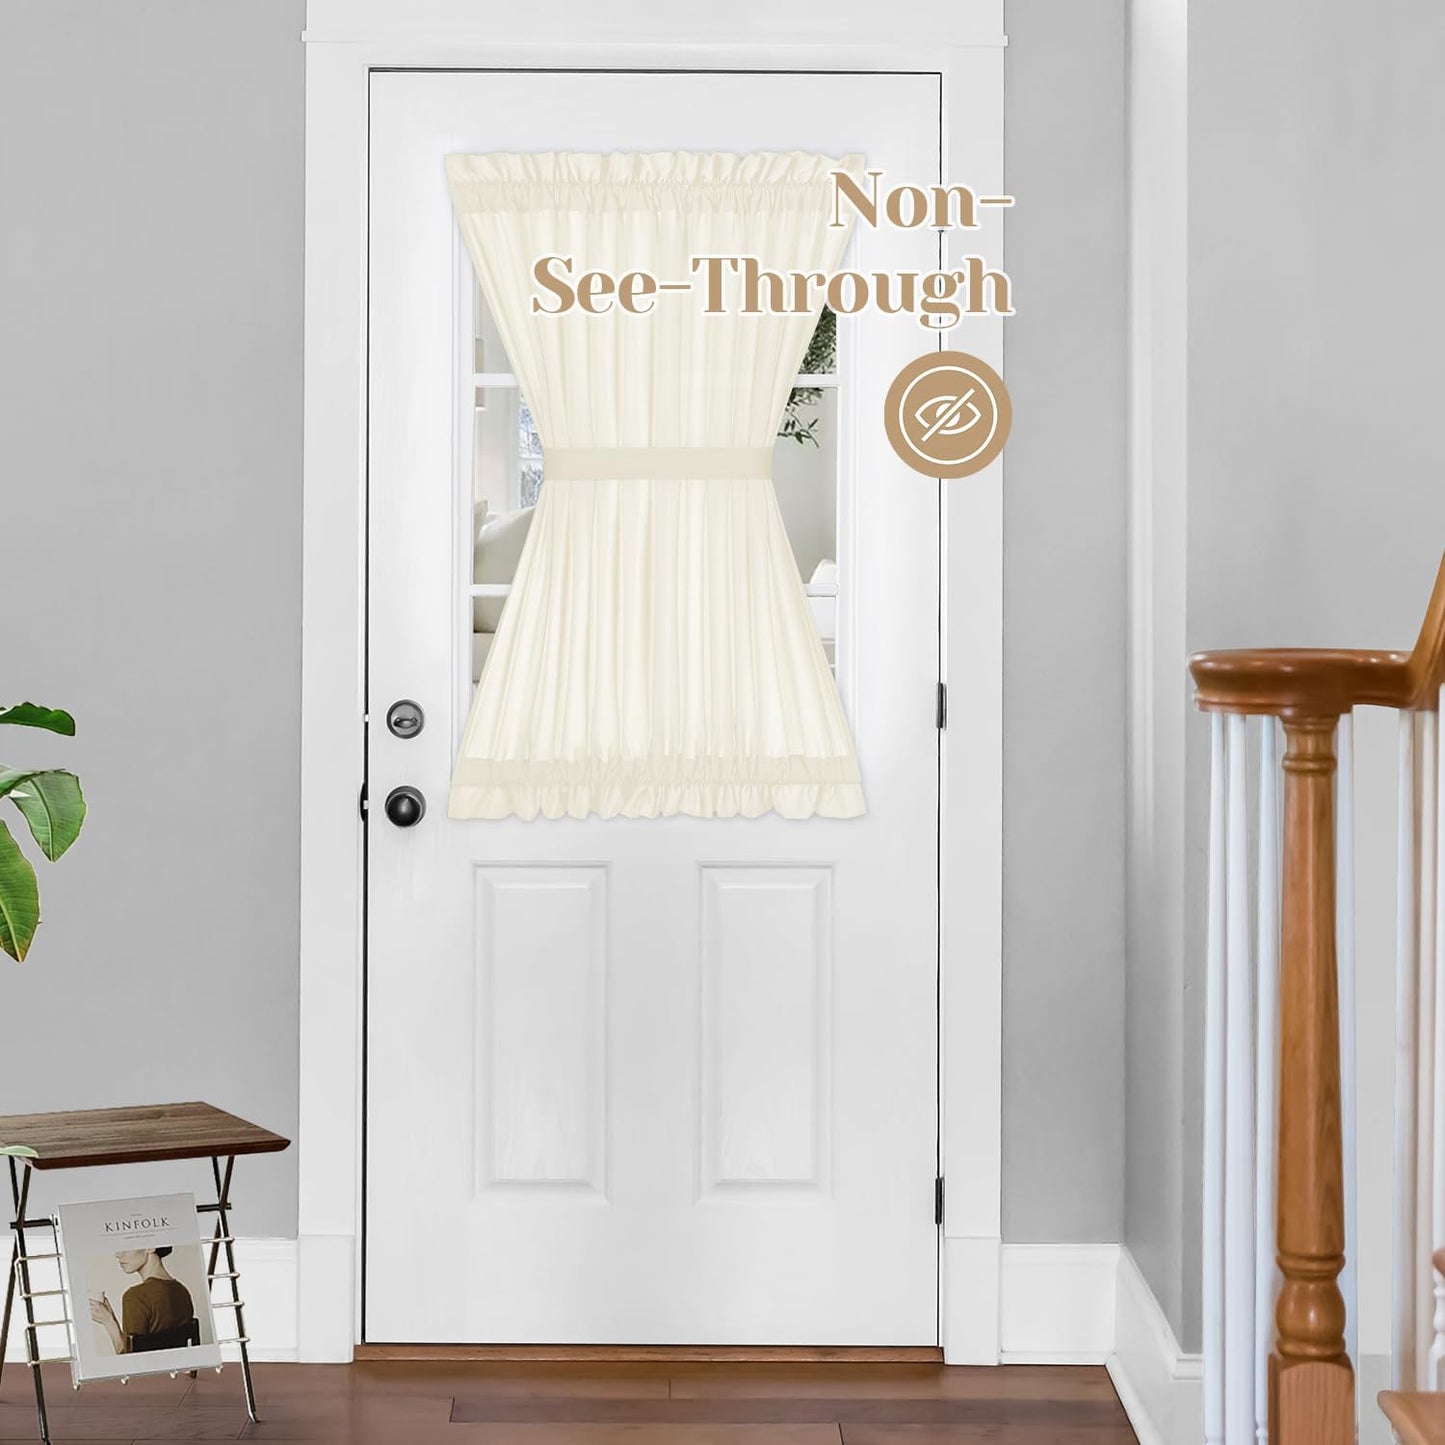 HOMEIDEAS Non-See-Through Sidelight Curtains for Front Door, Privacy Semi Sheer Door Window Curtains, Rod Pocket Light Filtering French Door Curtains with Tieback, (1 Panel, White, 26W X 72L)  HOMEIDEAS Cream Beige 1 Panel-54 X 40 